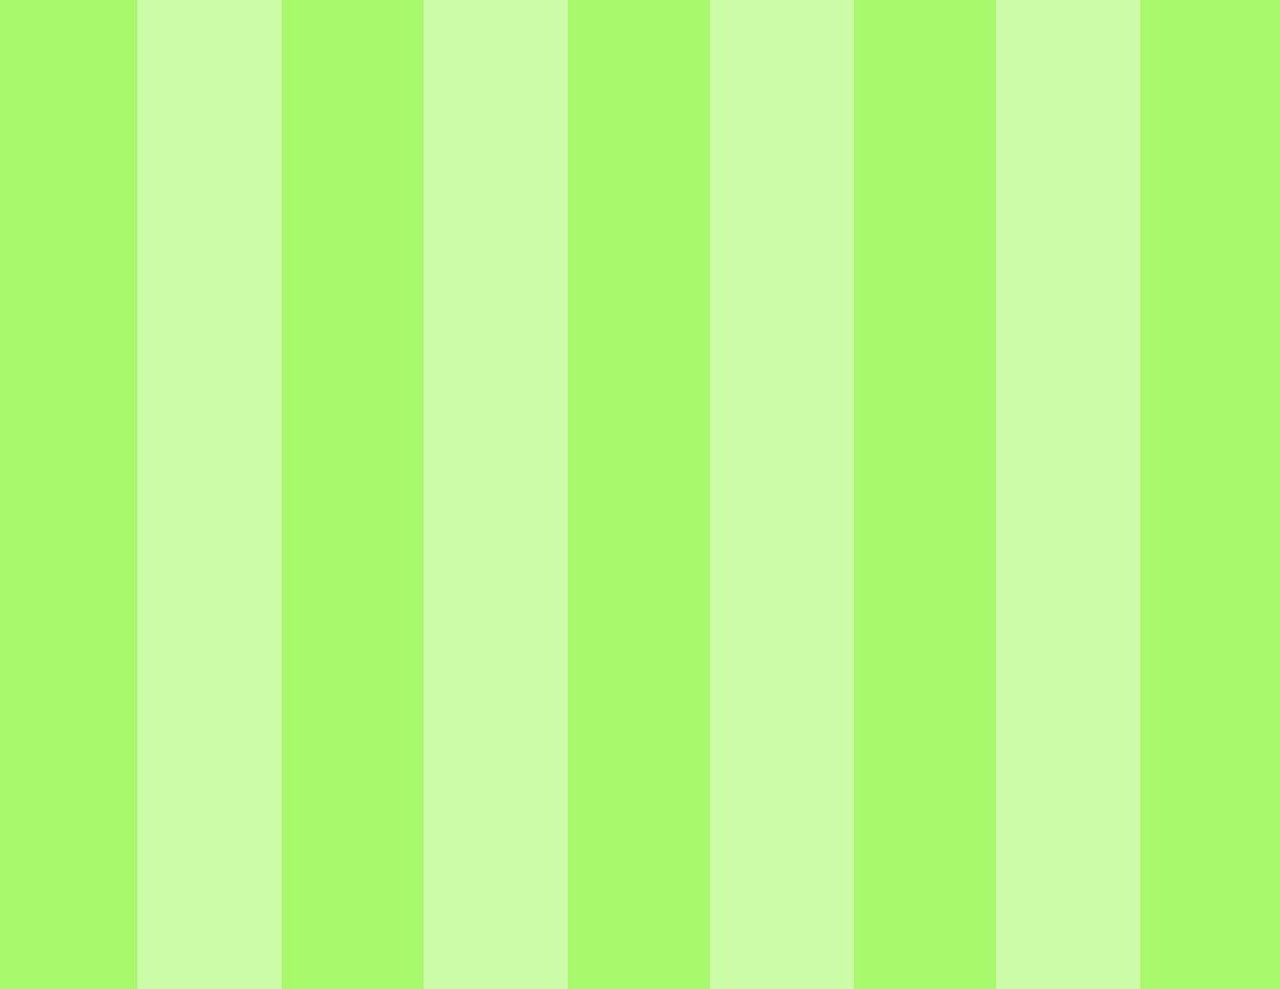 Lime Green Background sitiGreen backgrounds